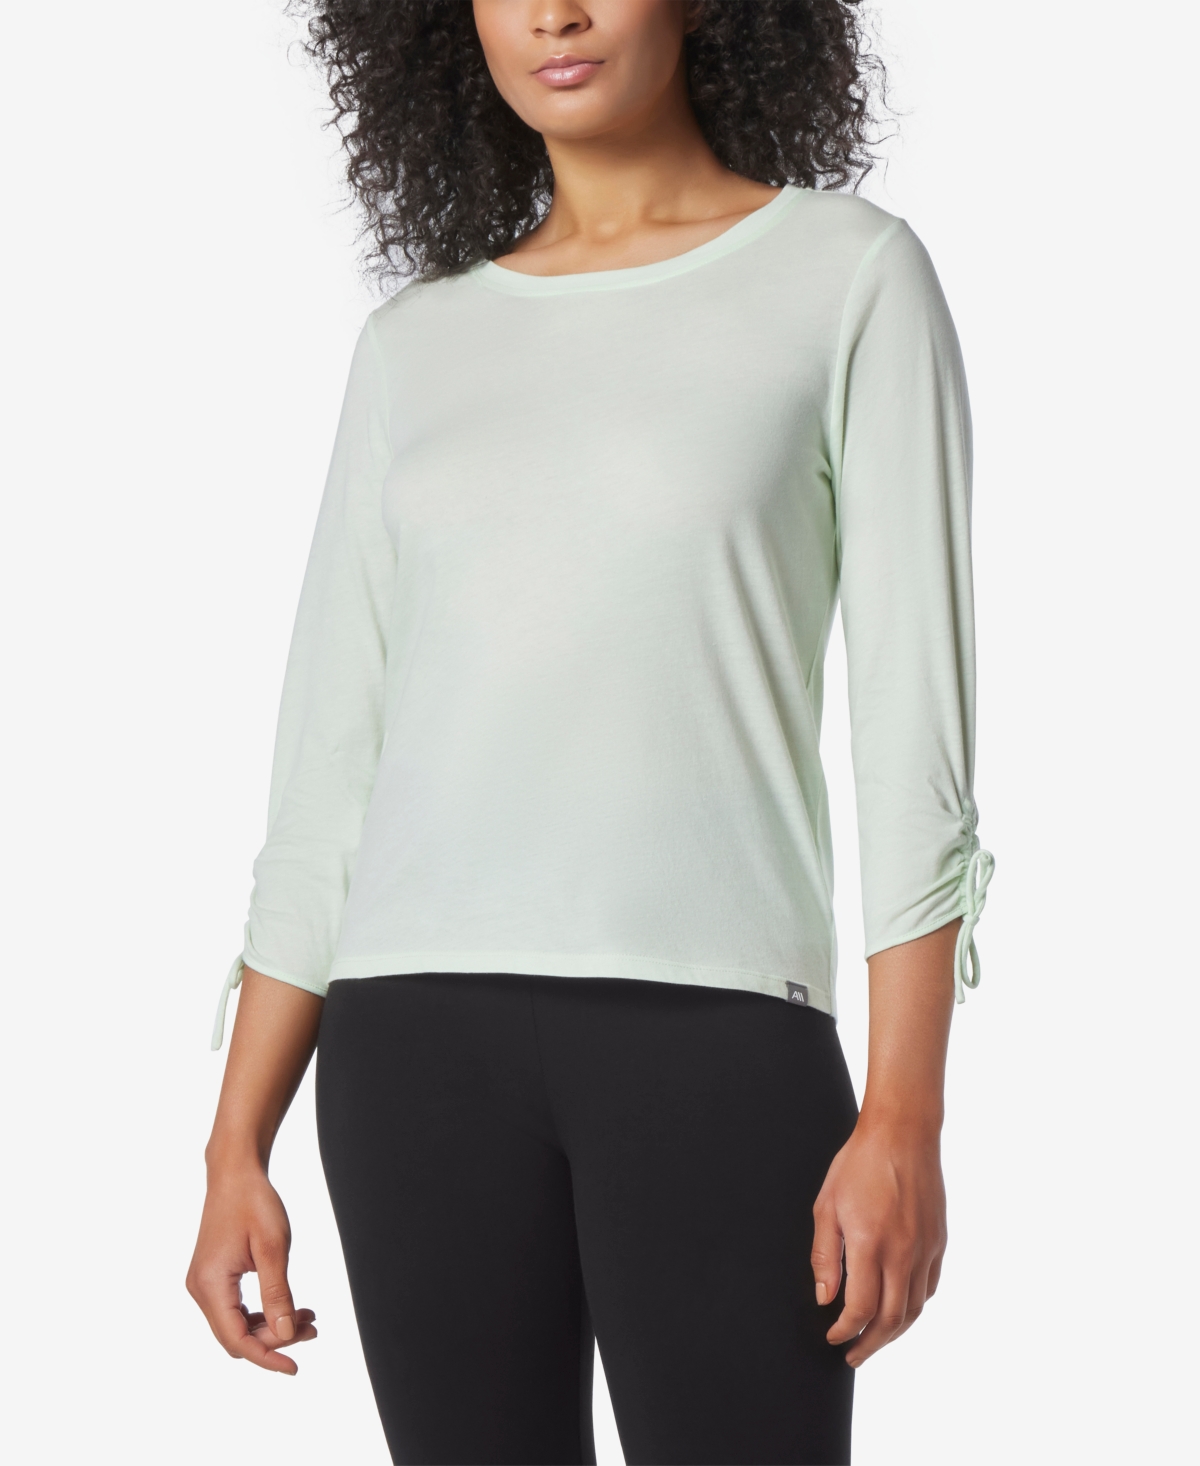 MARC NEW YORK ANDREW MARC SPORT WOMEN'S 3/4 SLEEVE T-SHIRT WITH CINCHED SLEEVE